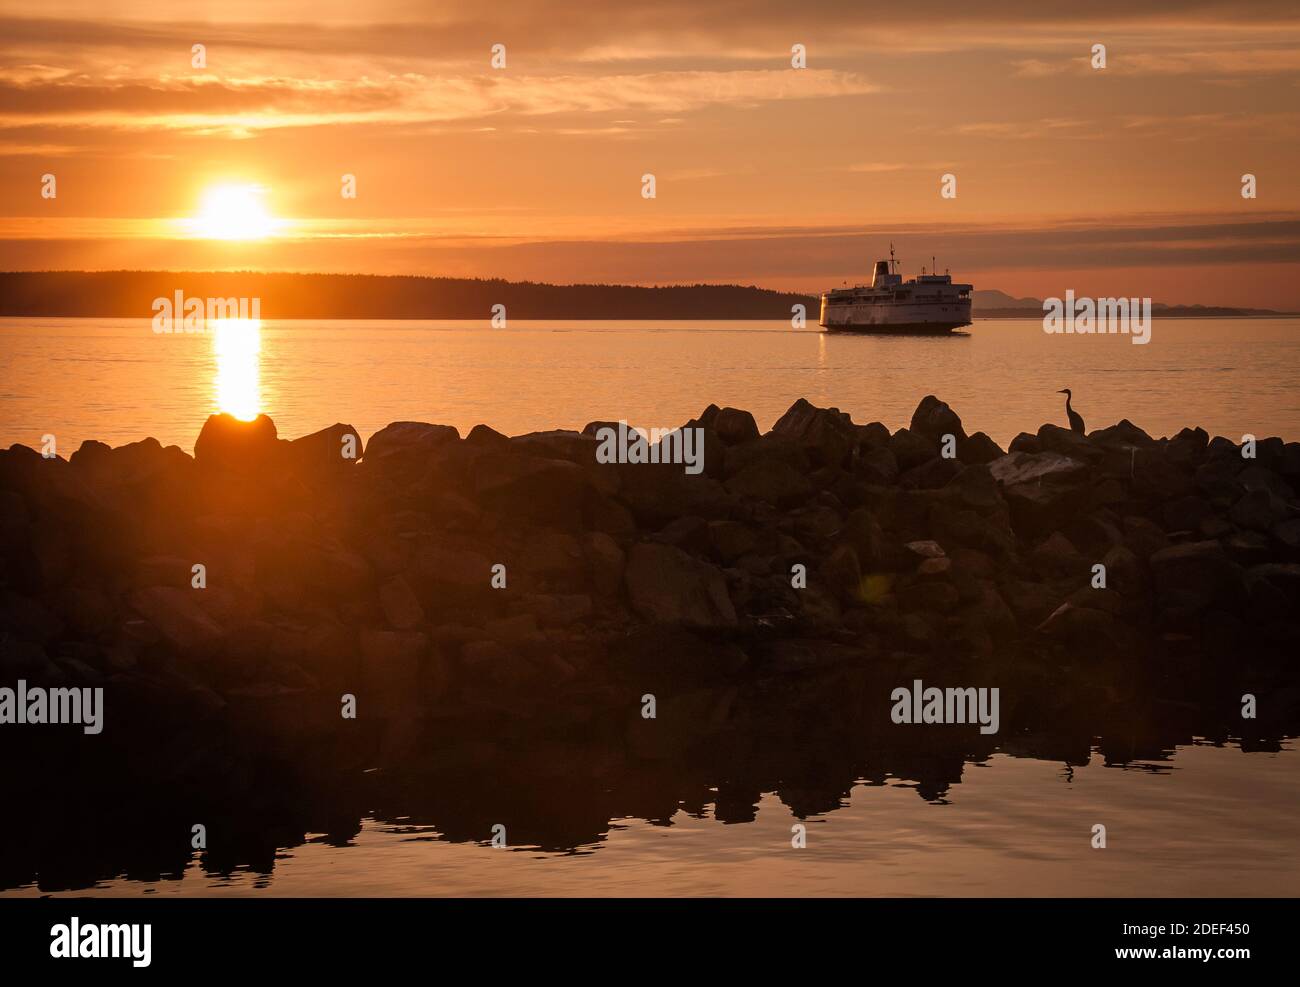 Landscape of a British Columbia passenger ferry in the West Sound/Powell River taken at sunset. Foreground of rock jetty with a heron silhouetted. Stock Photo